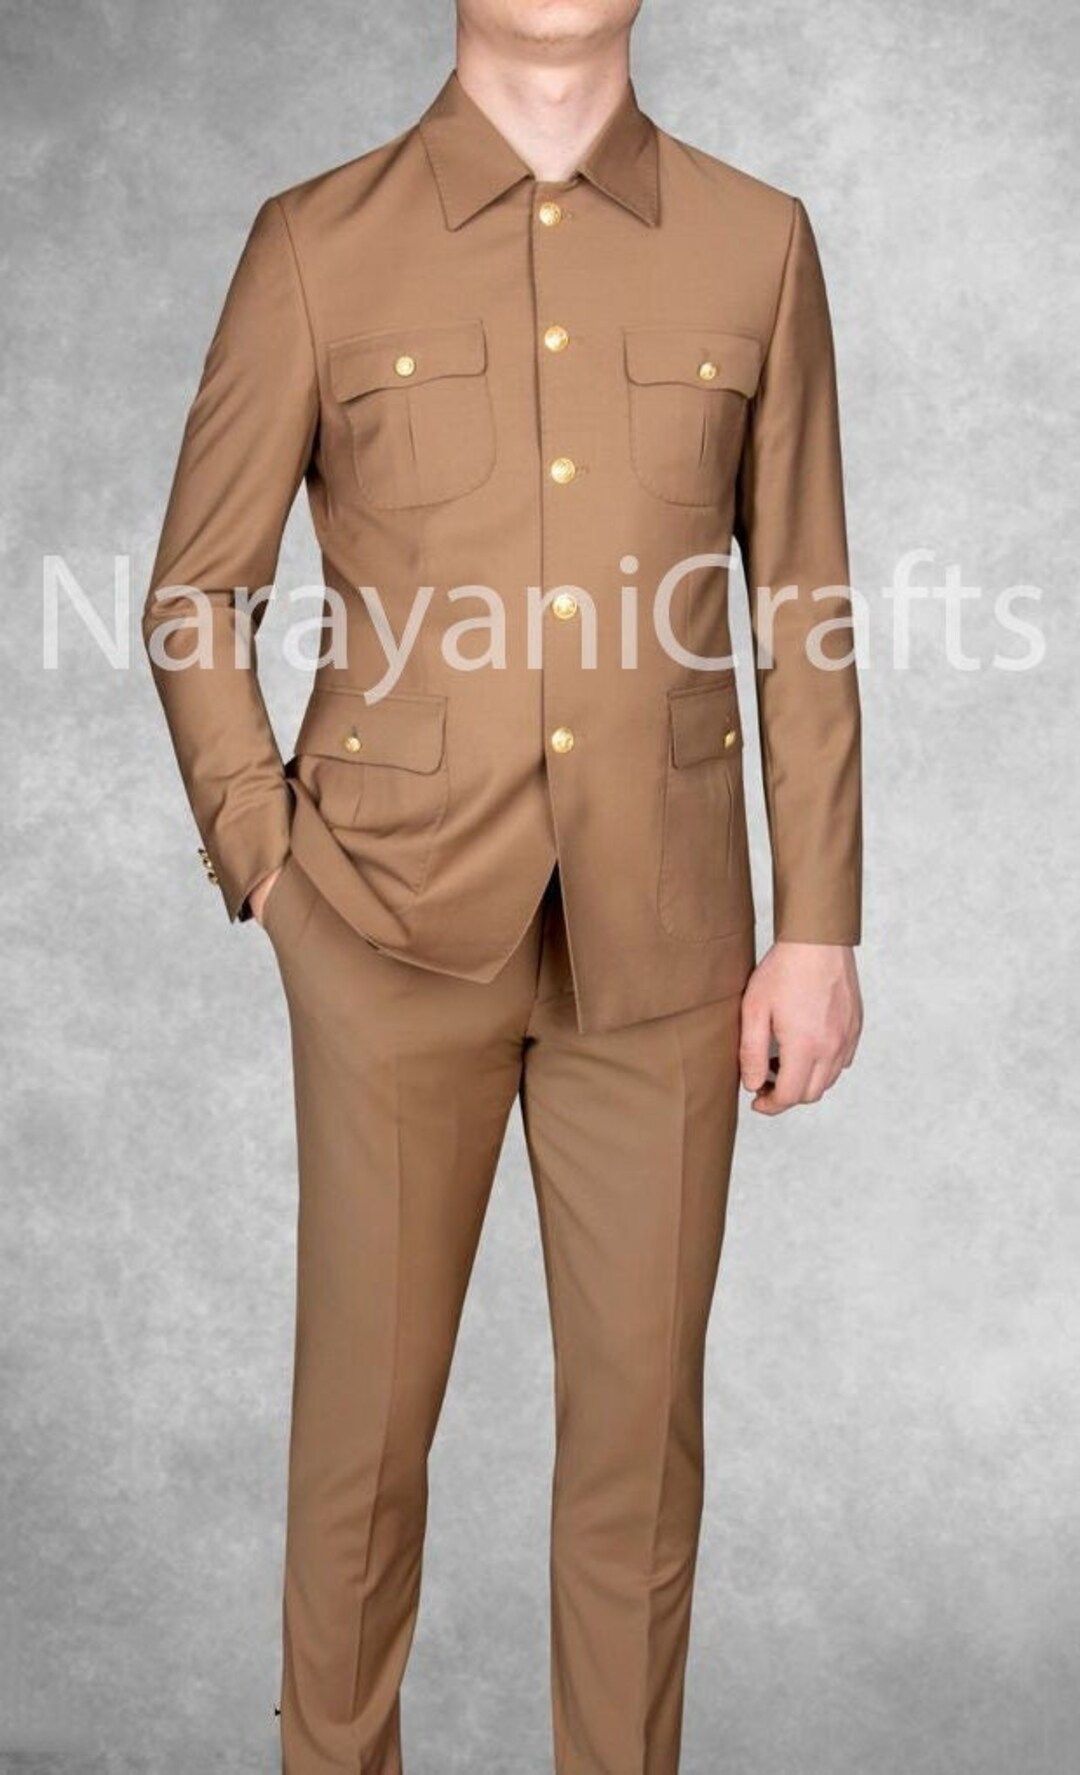 Buy Safari Suits Online - Sustainably Crafted by A.i.